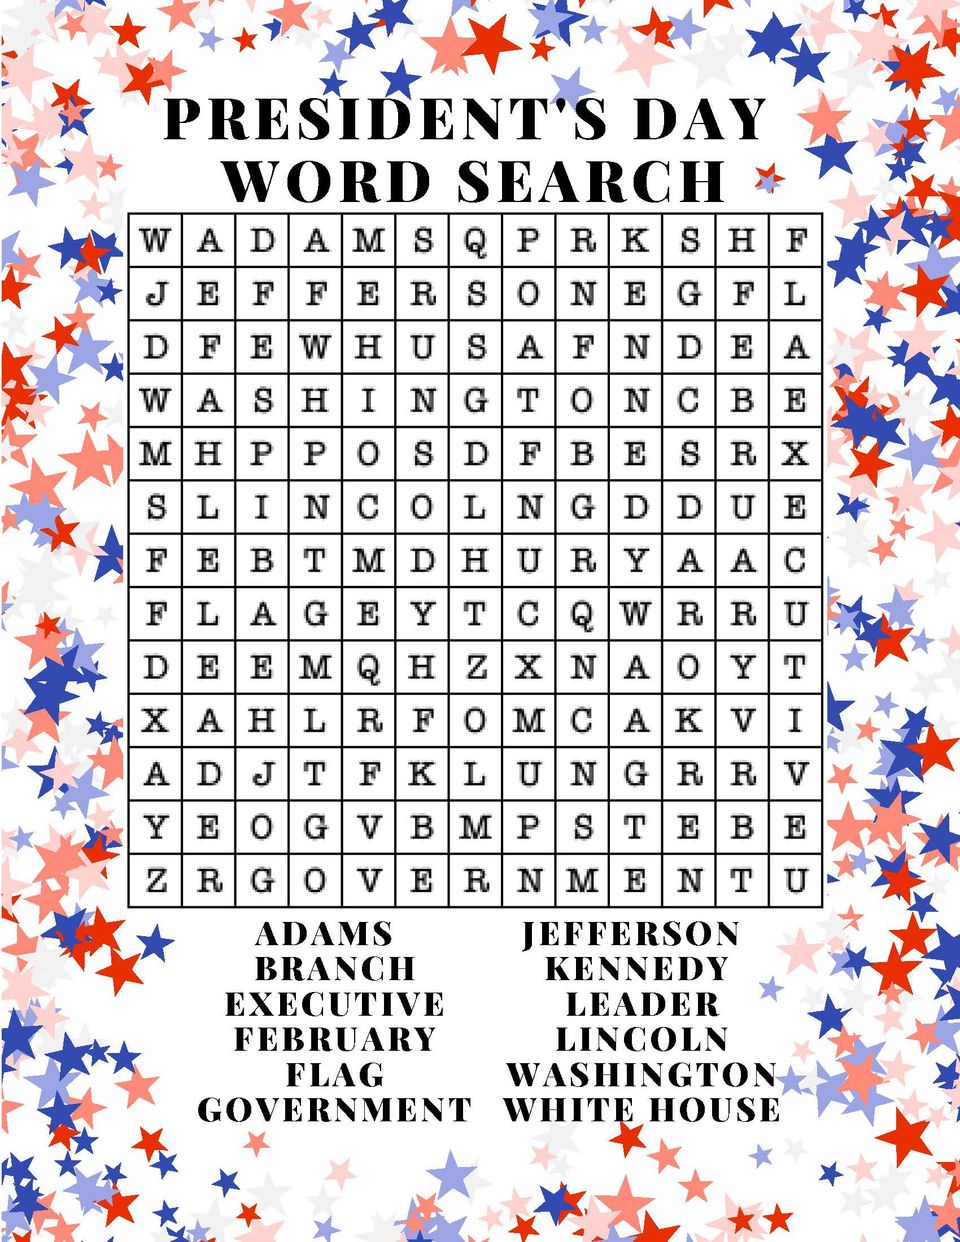 President's Day Word Search